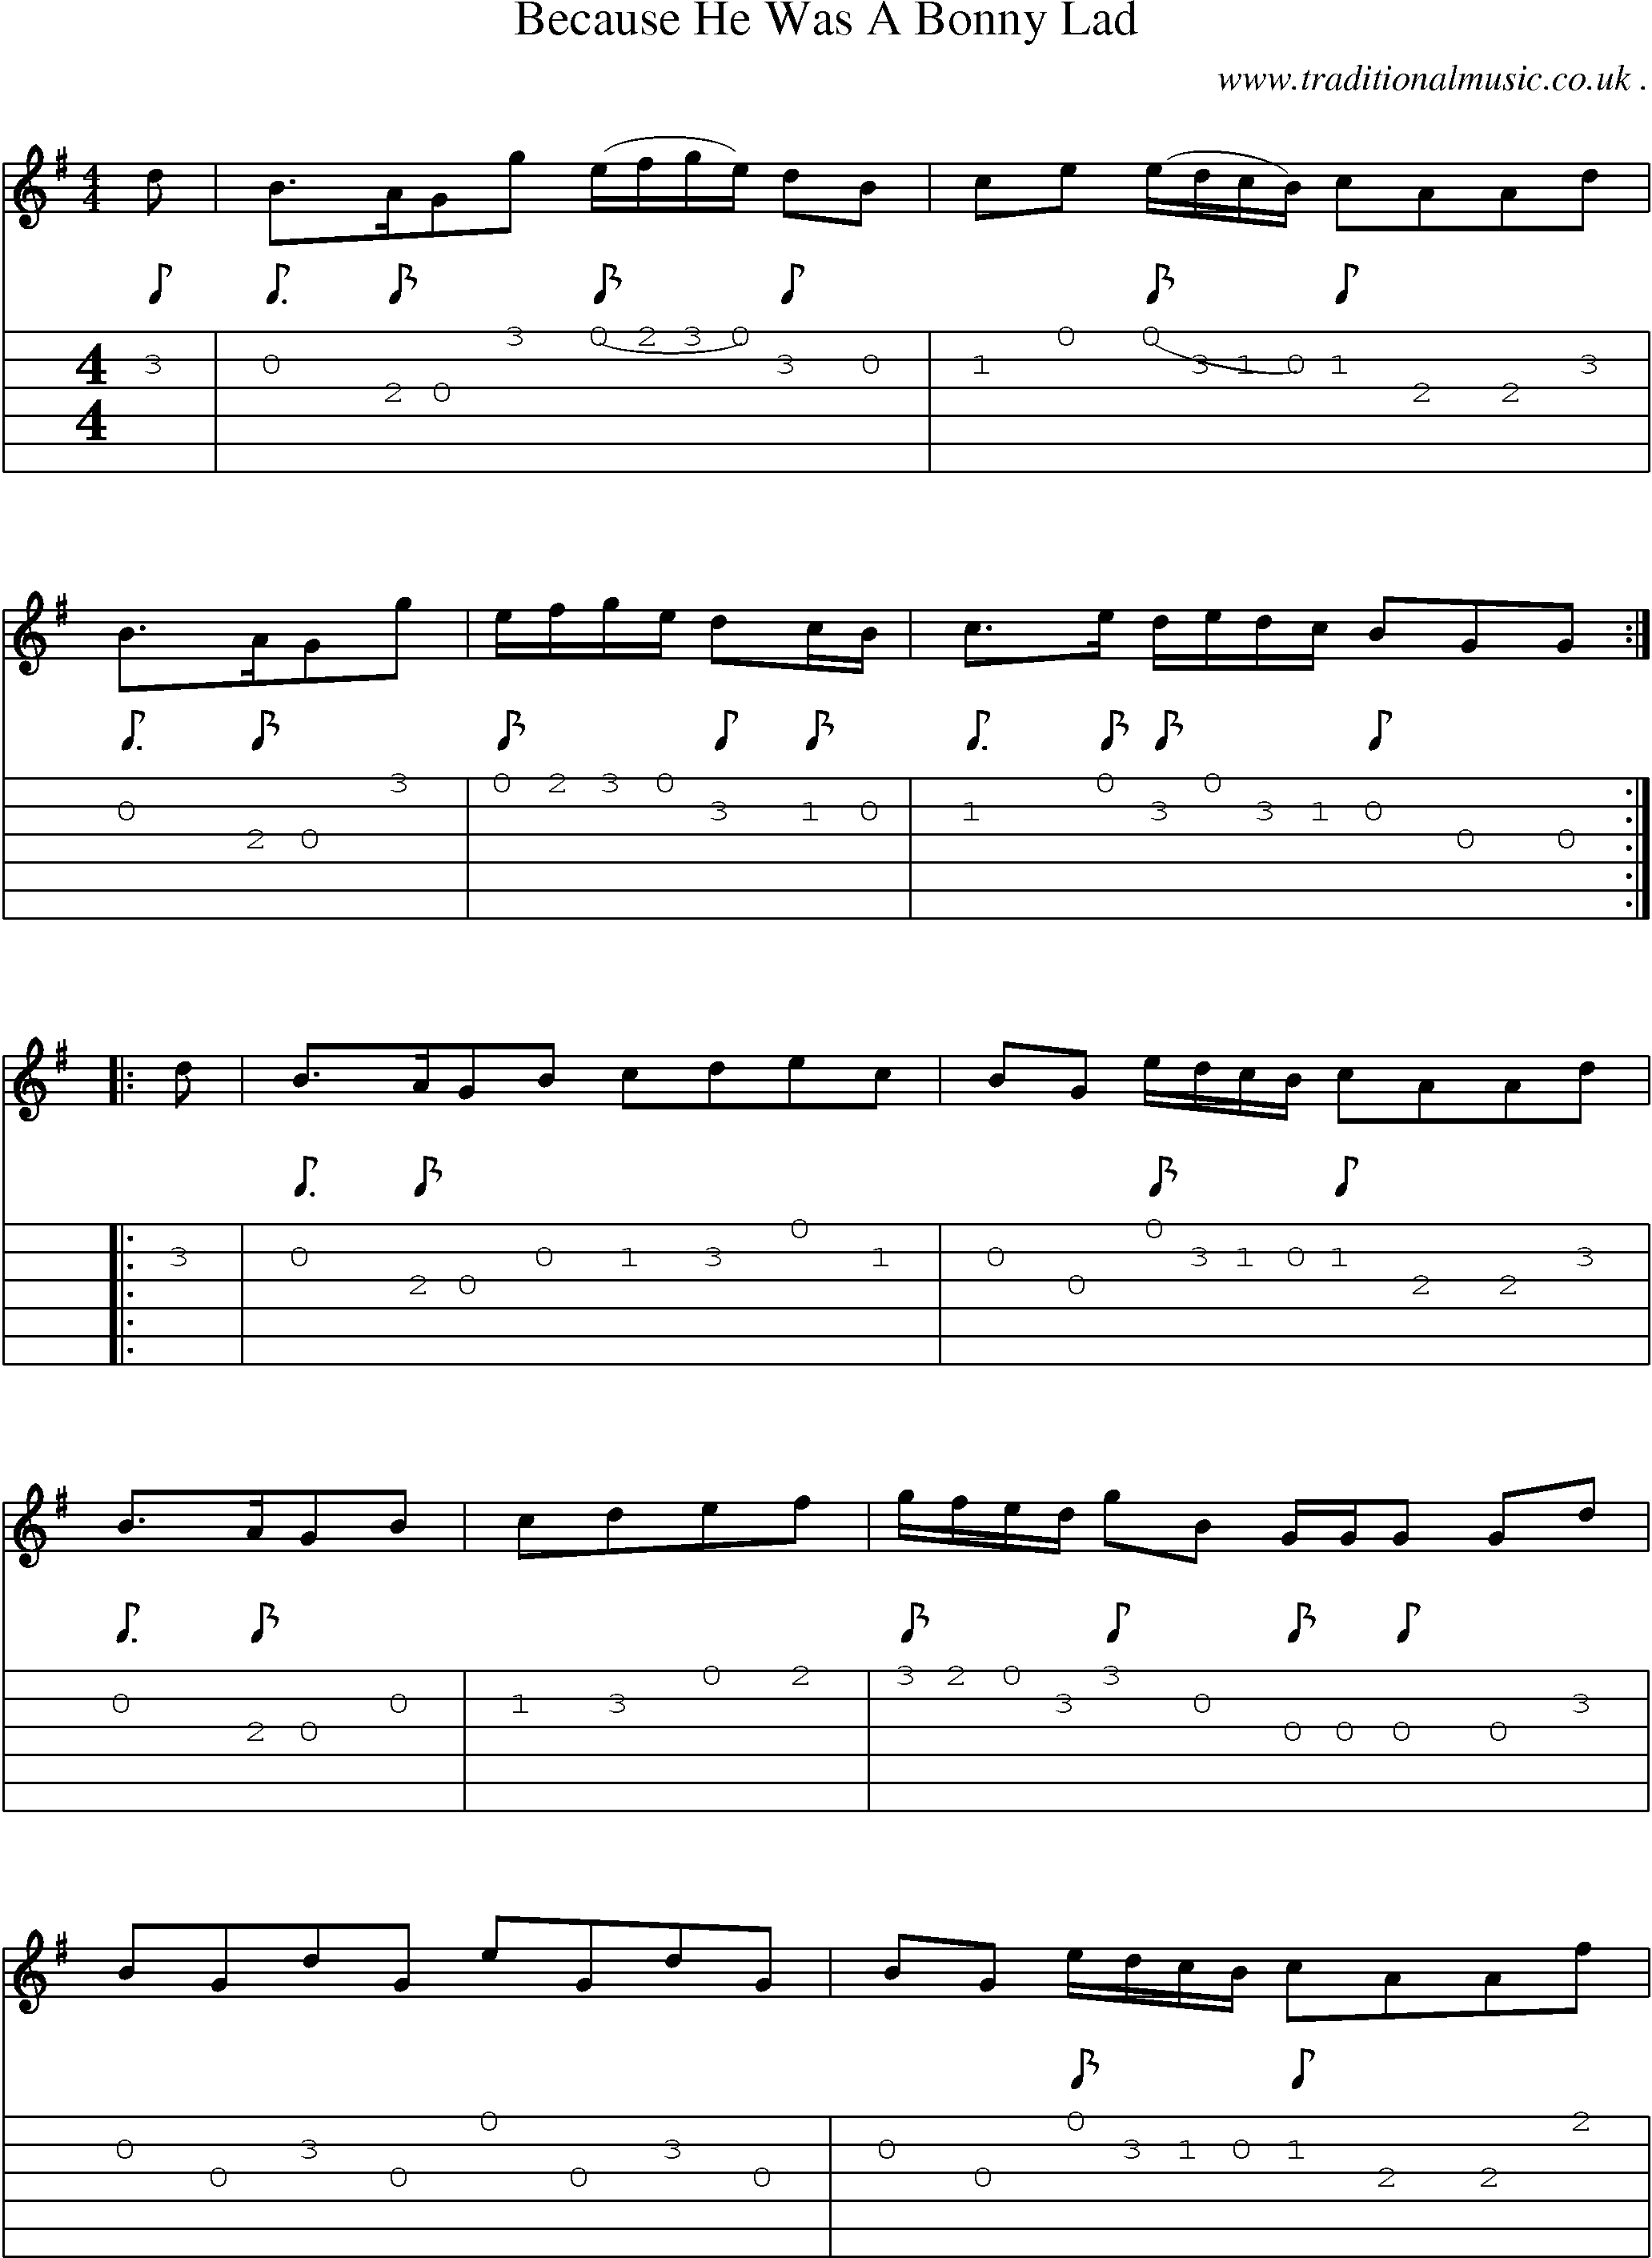 Sheet-Music and Guitar Tabs for Because He Was A Bonny Lad